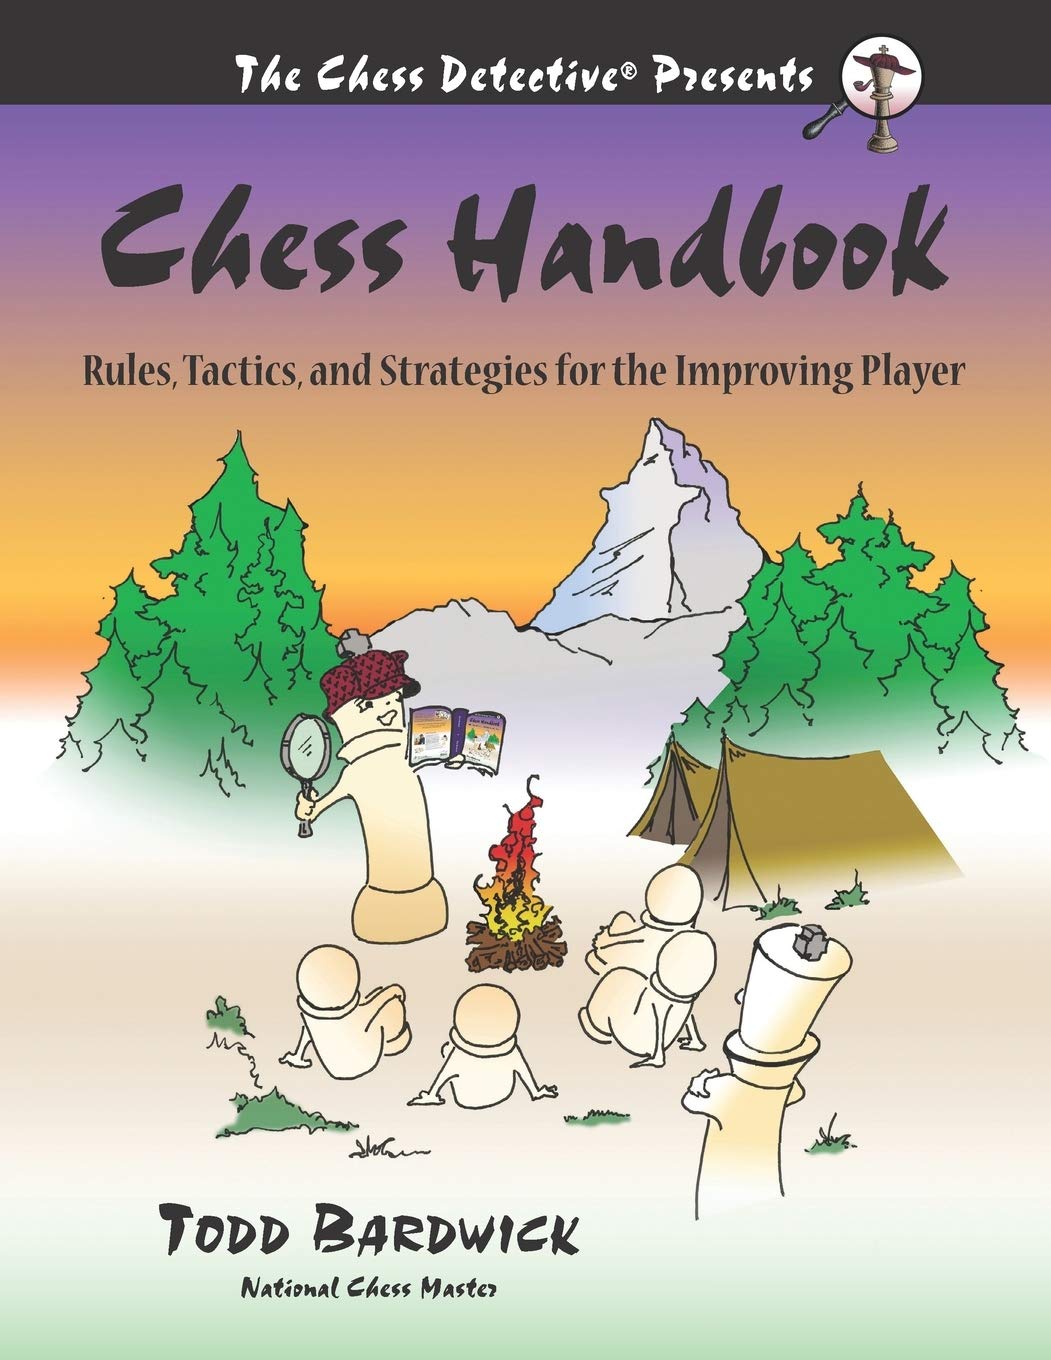 Chess 101 - Everything a New Chess Player by Dave Schloss